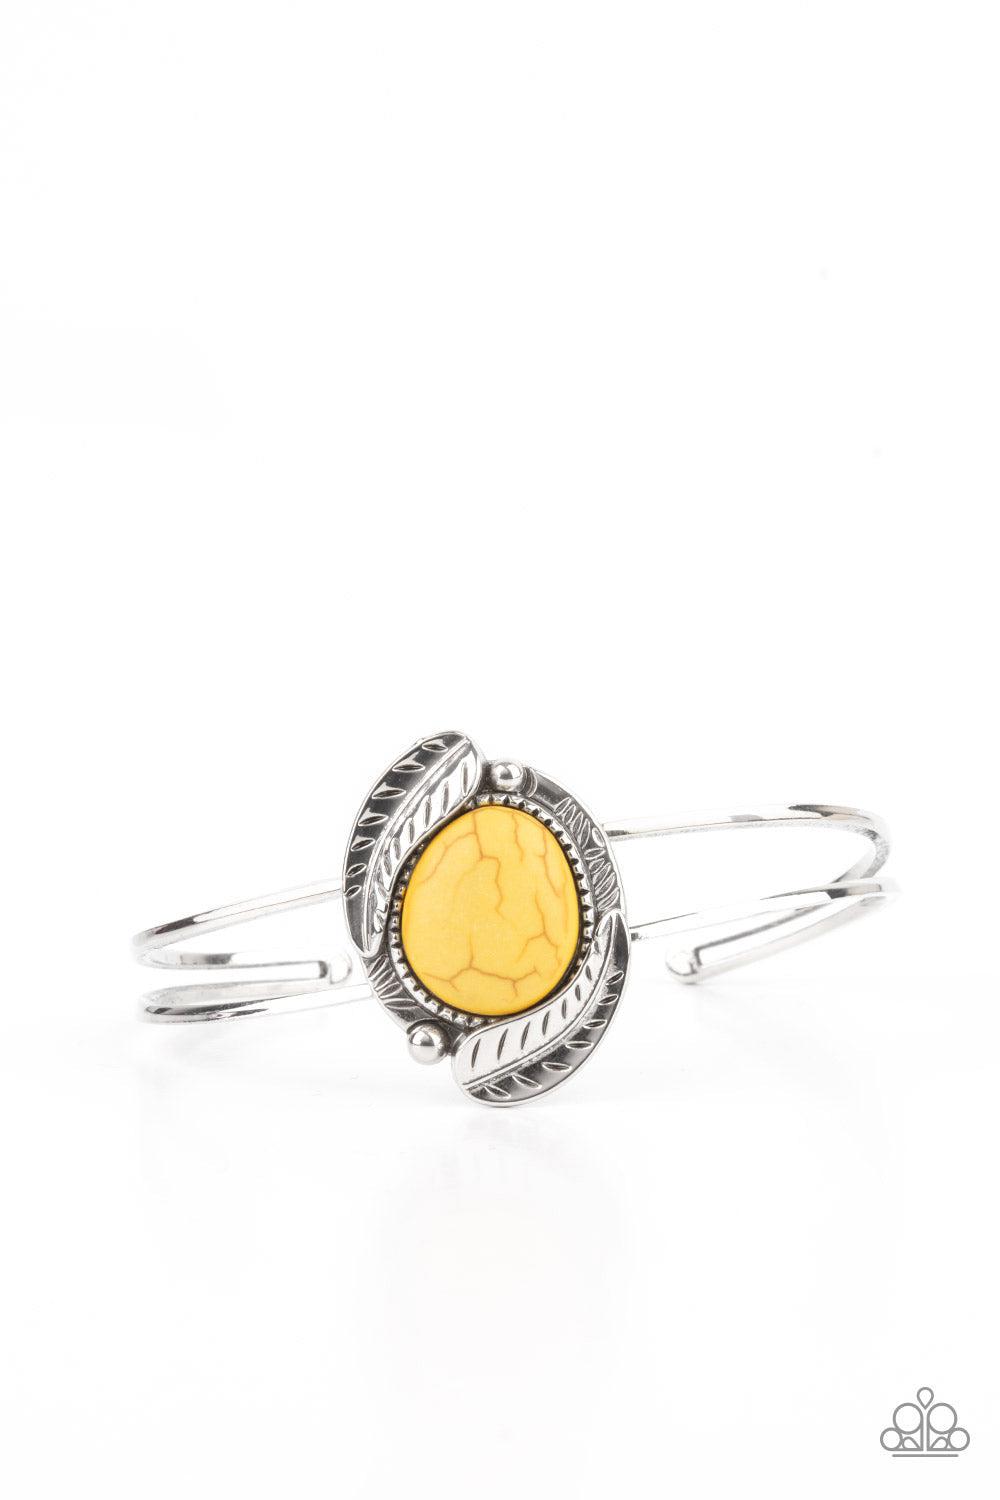 Living Off The BANDLANDS Yellow Stone Cuff Bracelet - Paparazzi Accessories- lightbox - CarasShop.com - $5 Jewelry by Cara Jewels